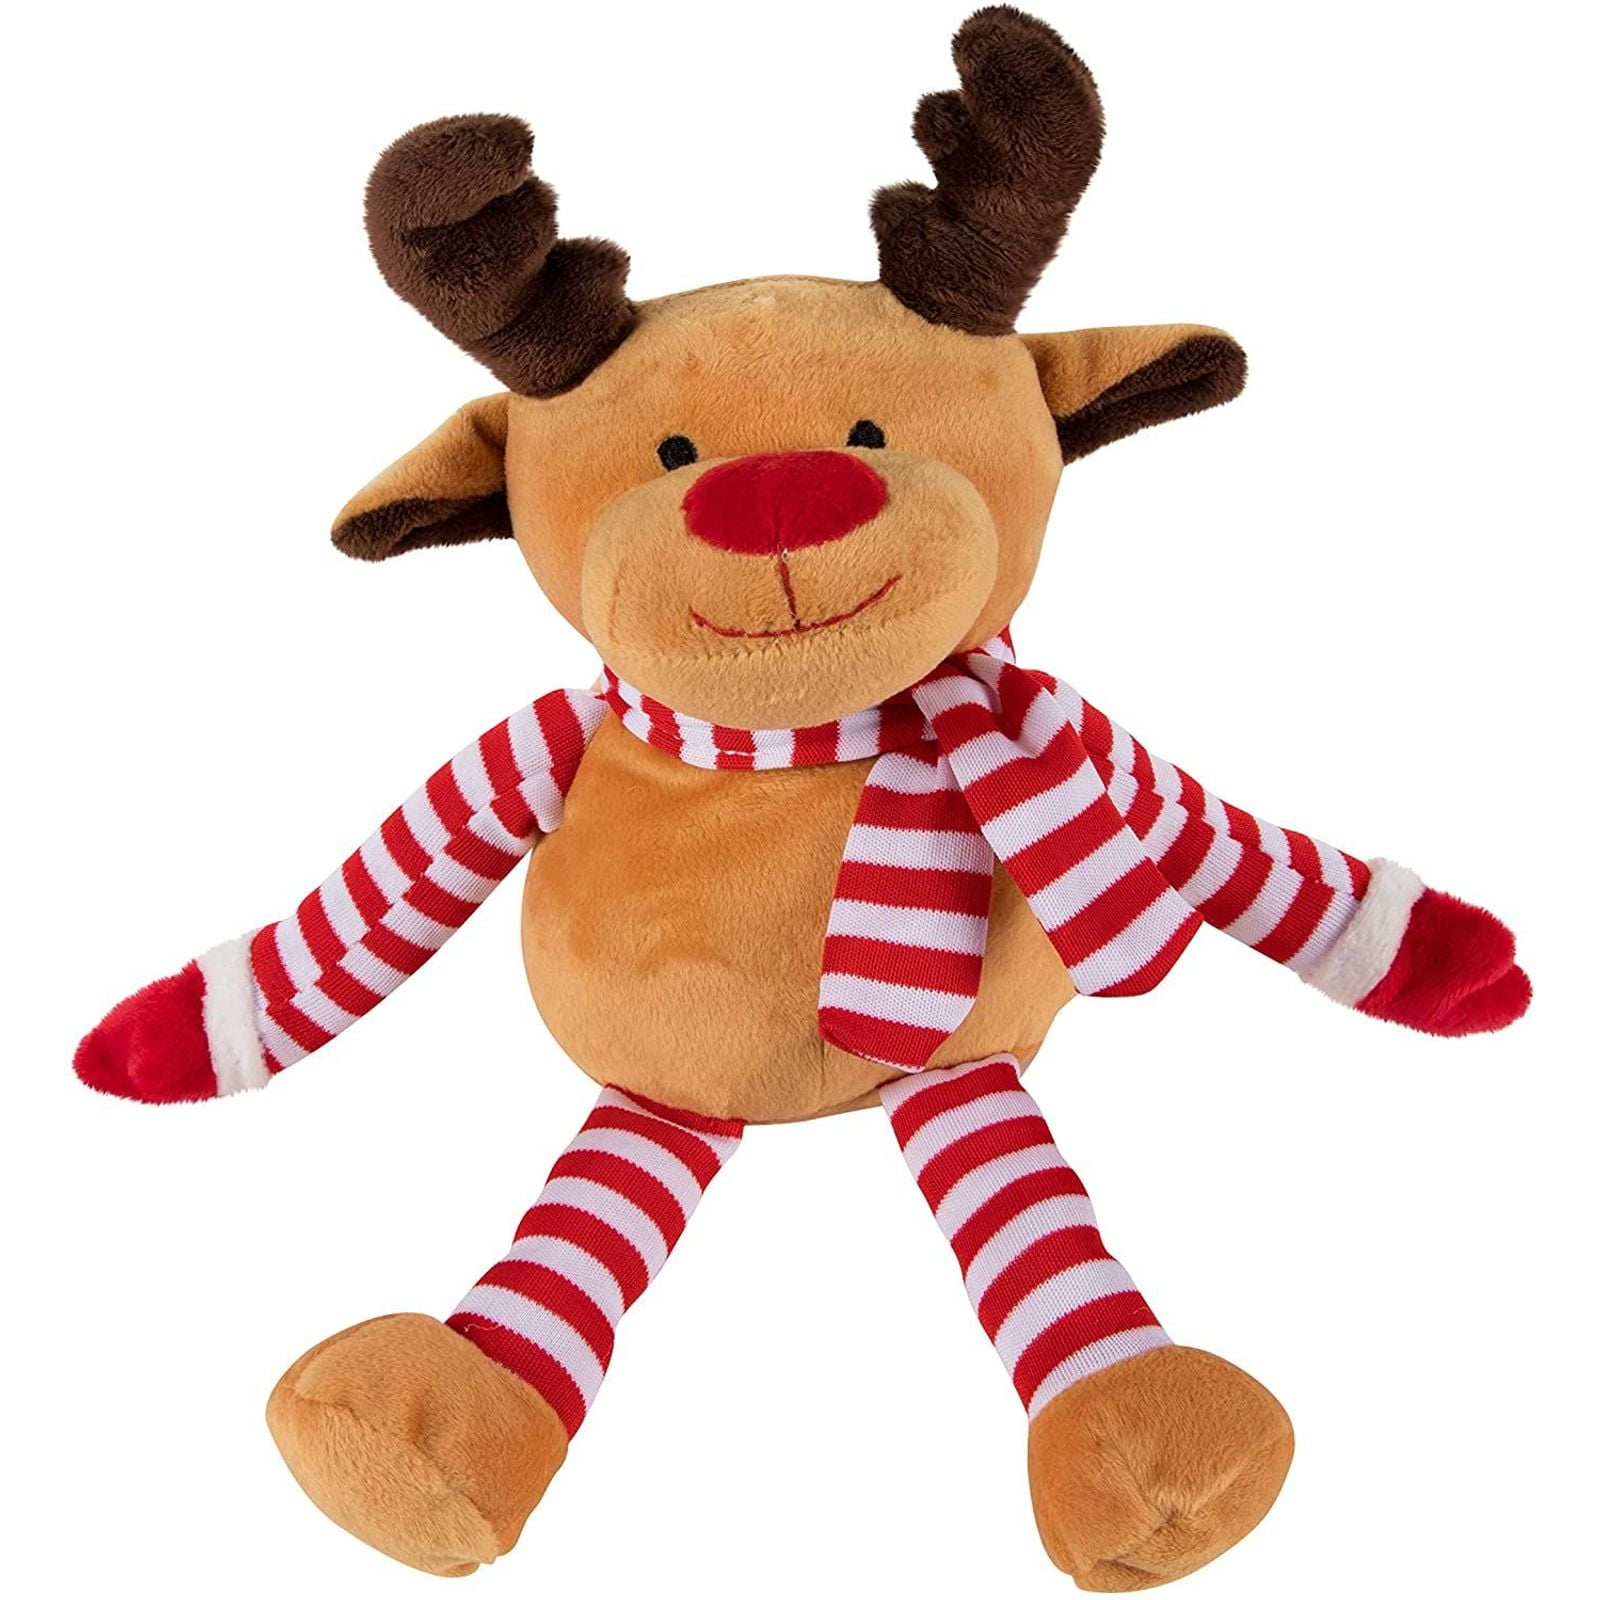 Details about   Reindeer Plush Doll Plush Stuffed Toys Christmas Birthday Gift For Children 40cm 